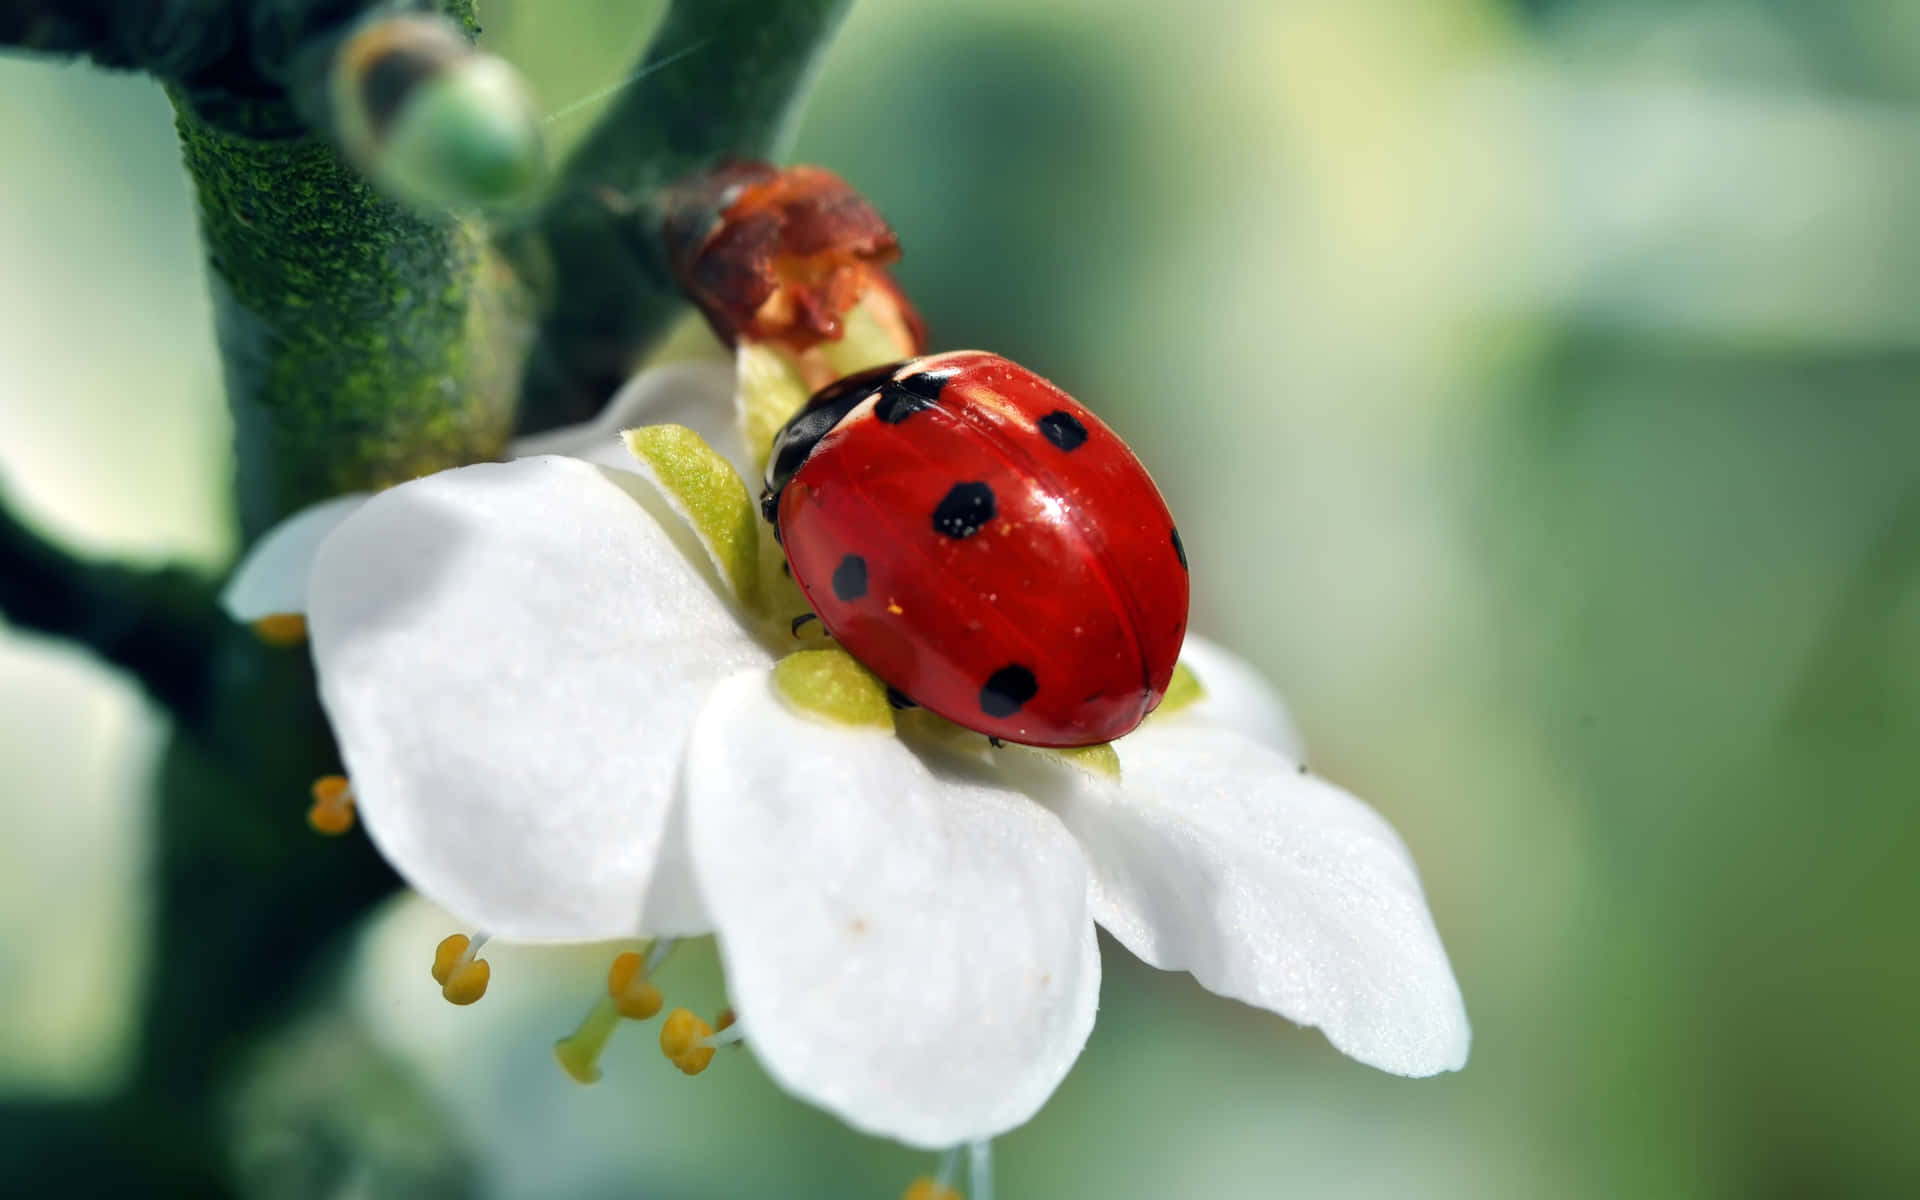 Image  A Ladybug Standing on the Leaf of a Plant